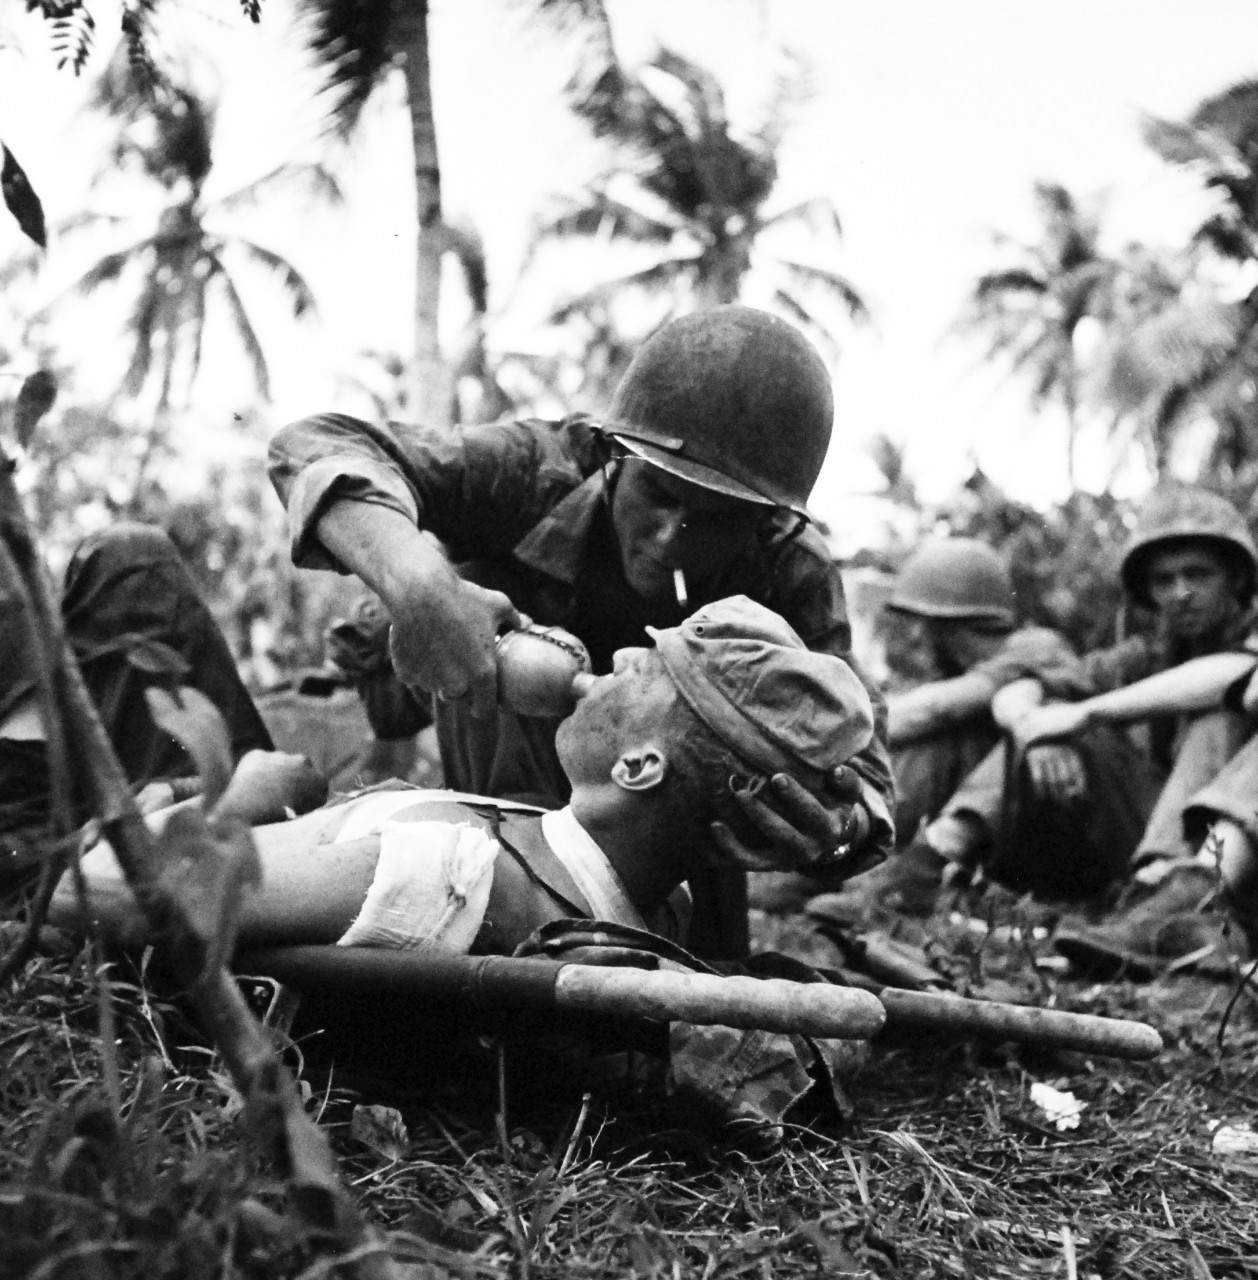 80-G-475151: Invasion of Guam, July 21-August 10, 1944 .  U.S. Navy Corpsman gives drink to wounded U.S. Marine on Guam.  Photographed by Lieutenant Paul Dorsey, July 1944, TR-10753.      Official U.S. Navy photograph, now in the collections of the National Archives.   (2017/03/15).